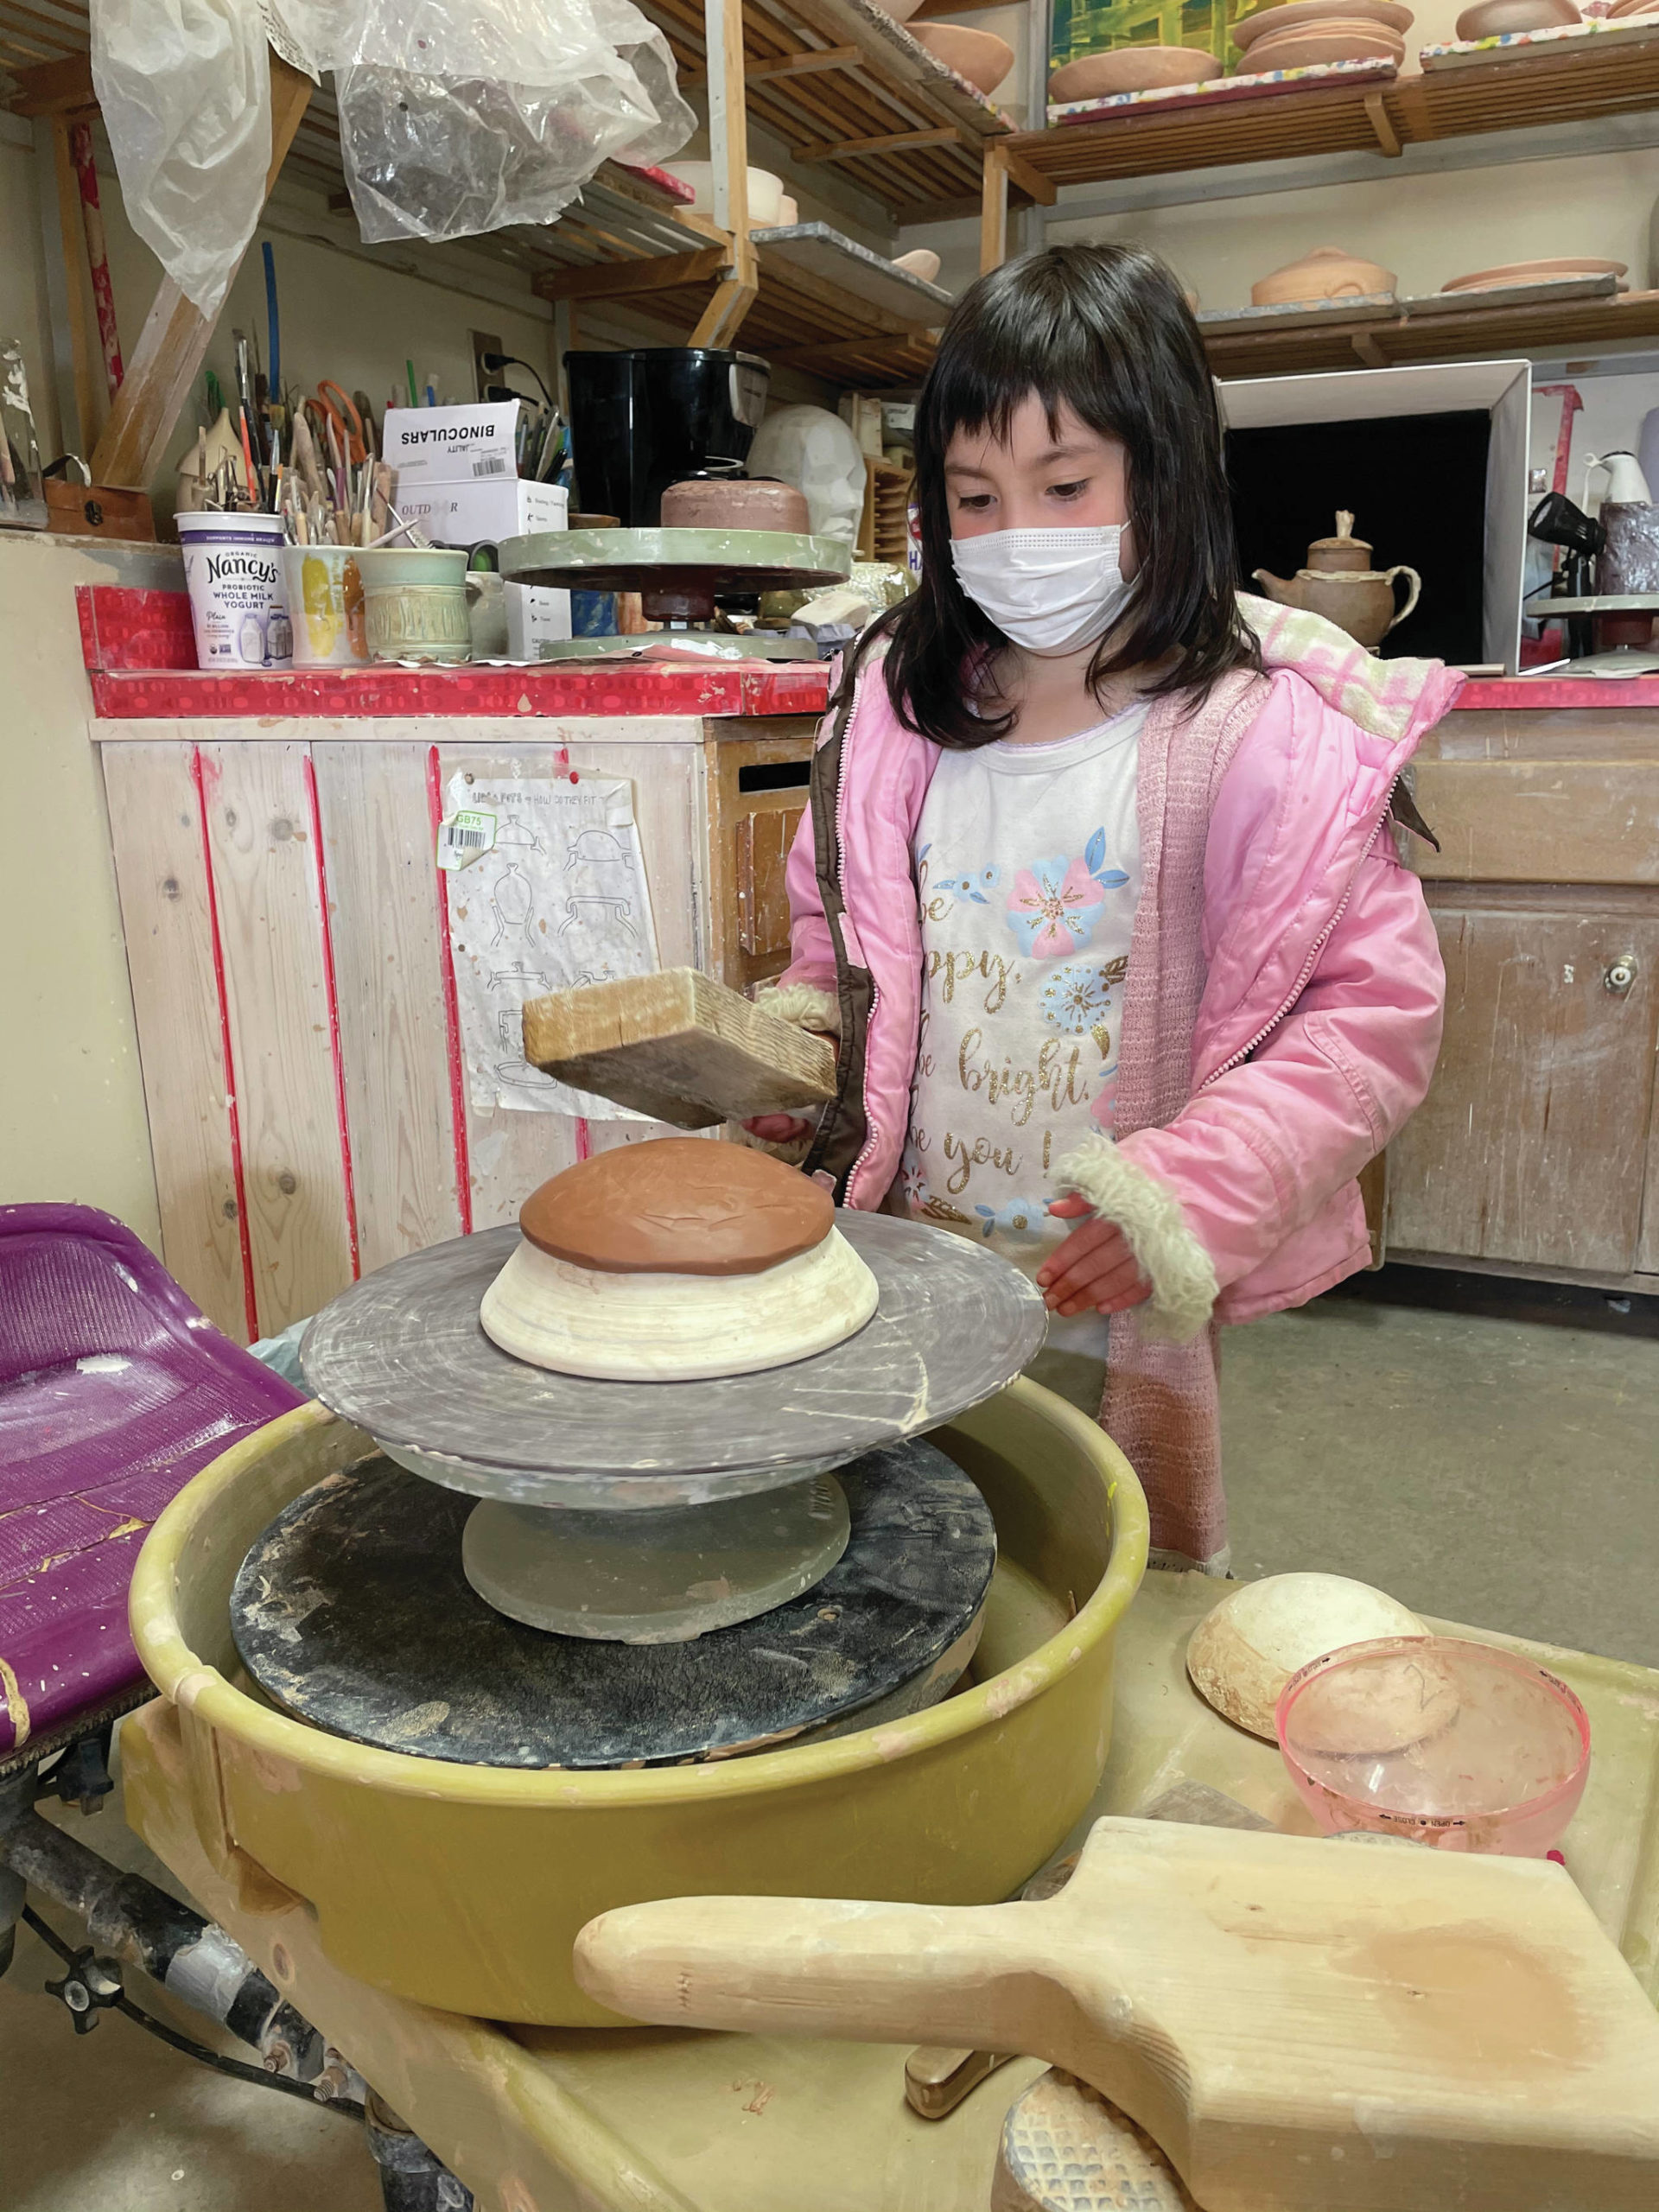 A little visitor at the Jars of Clay studio gets hands-on with the paddle pot demonstration on Saturday, May 15, 2021, at the studio in Homer, Alaska. (Photo by Tara Schmidt)